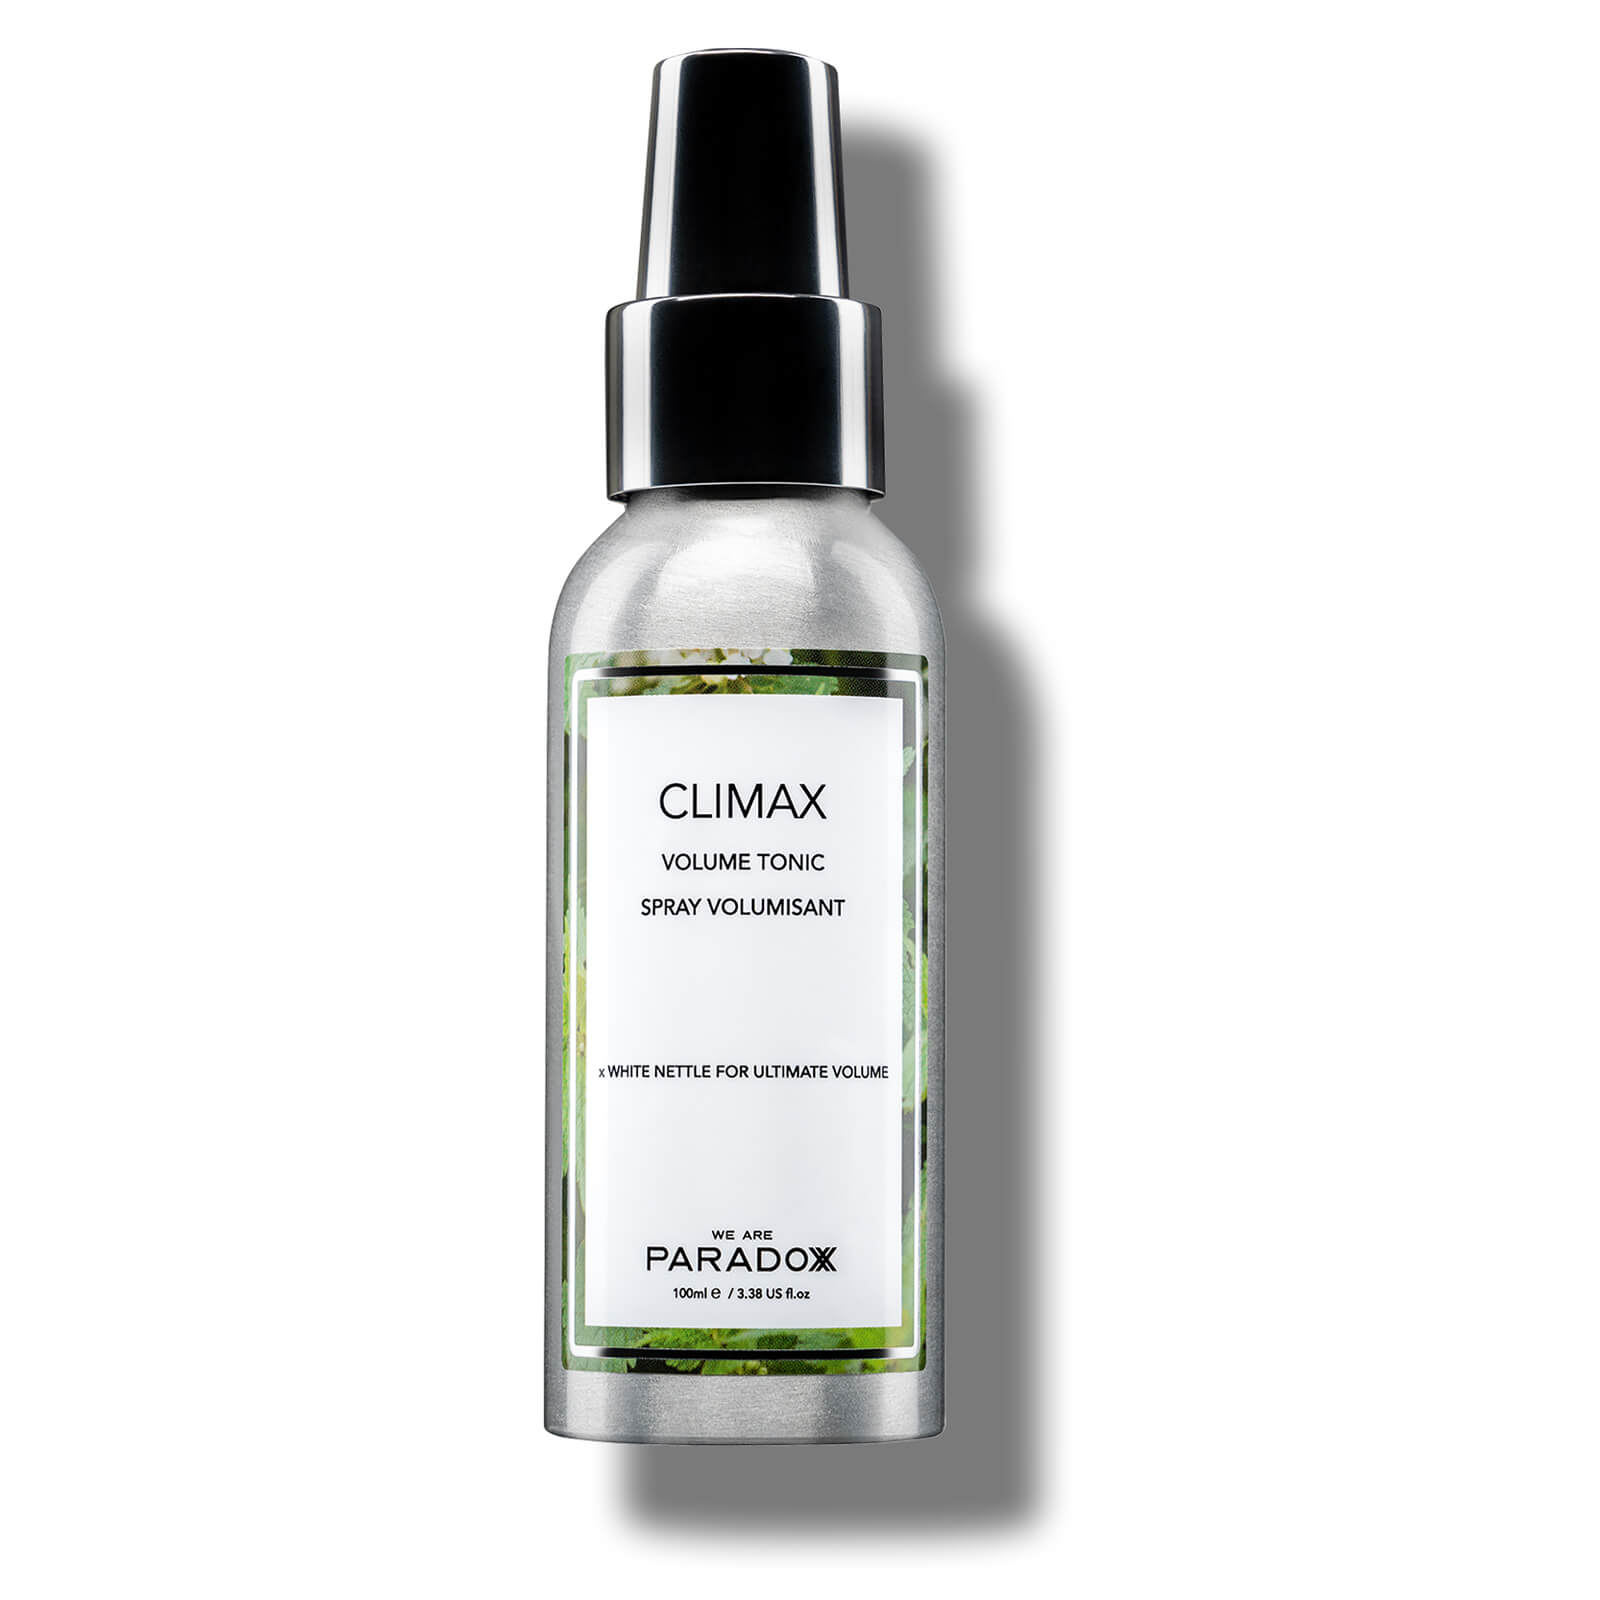 We Are Paradox - Climax Volume Tonic Spray - Give Us Beauty